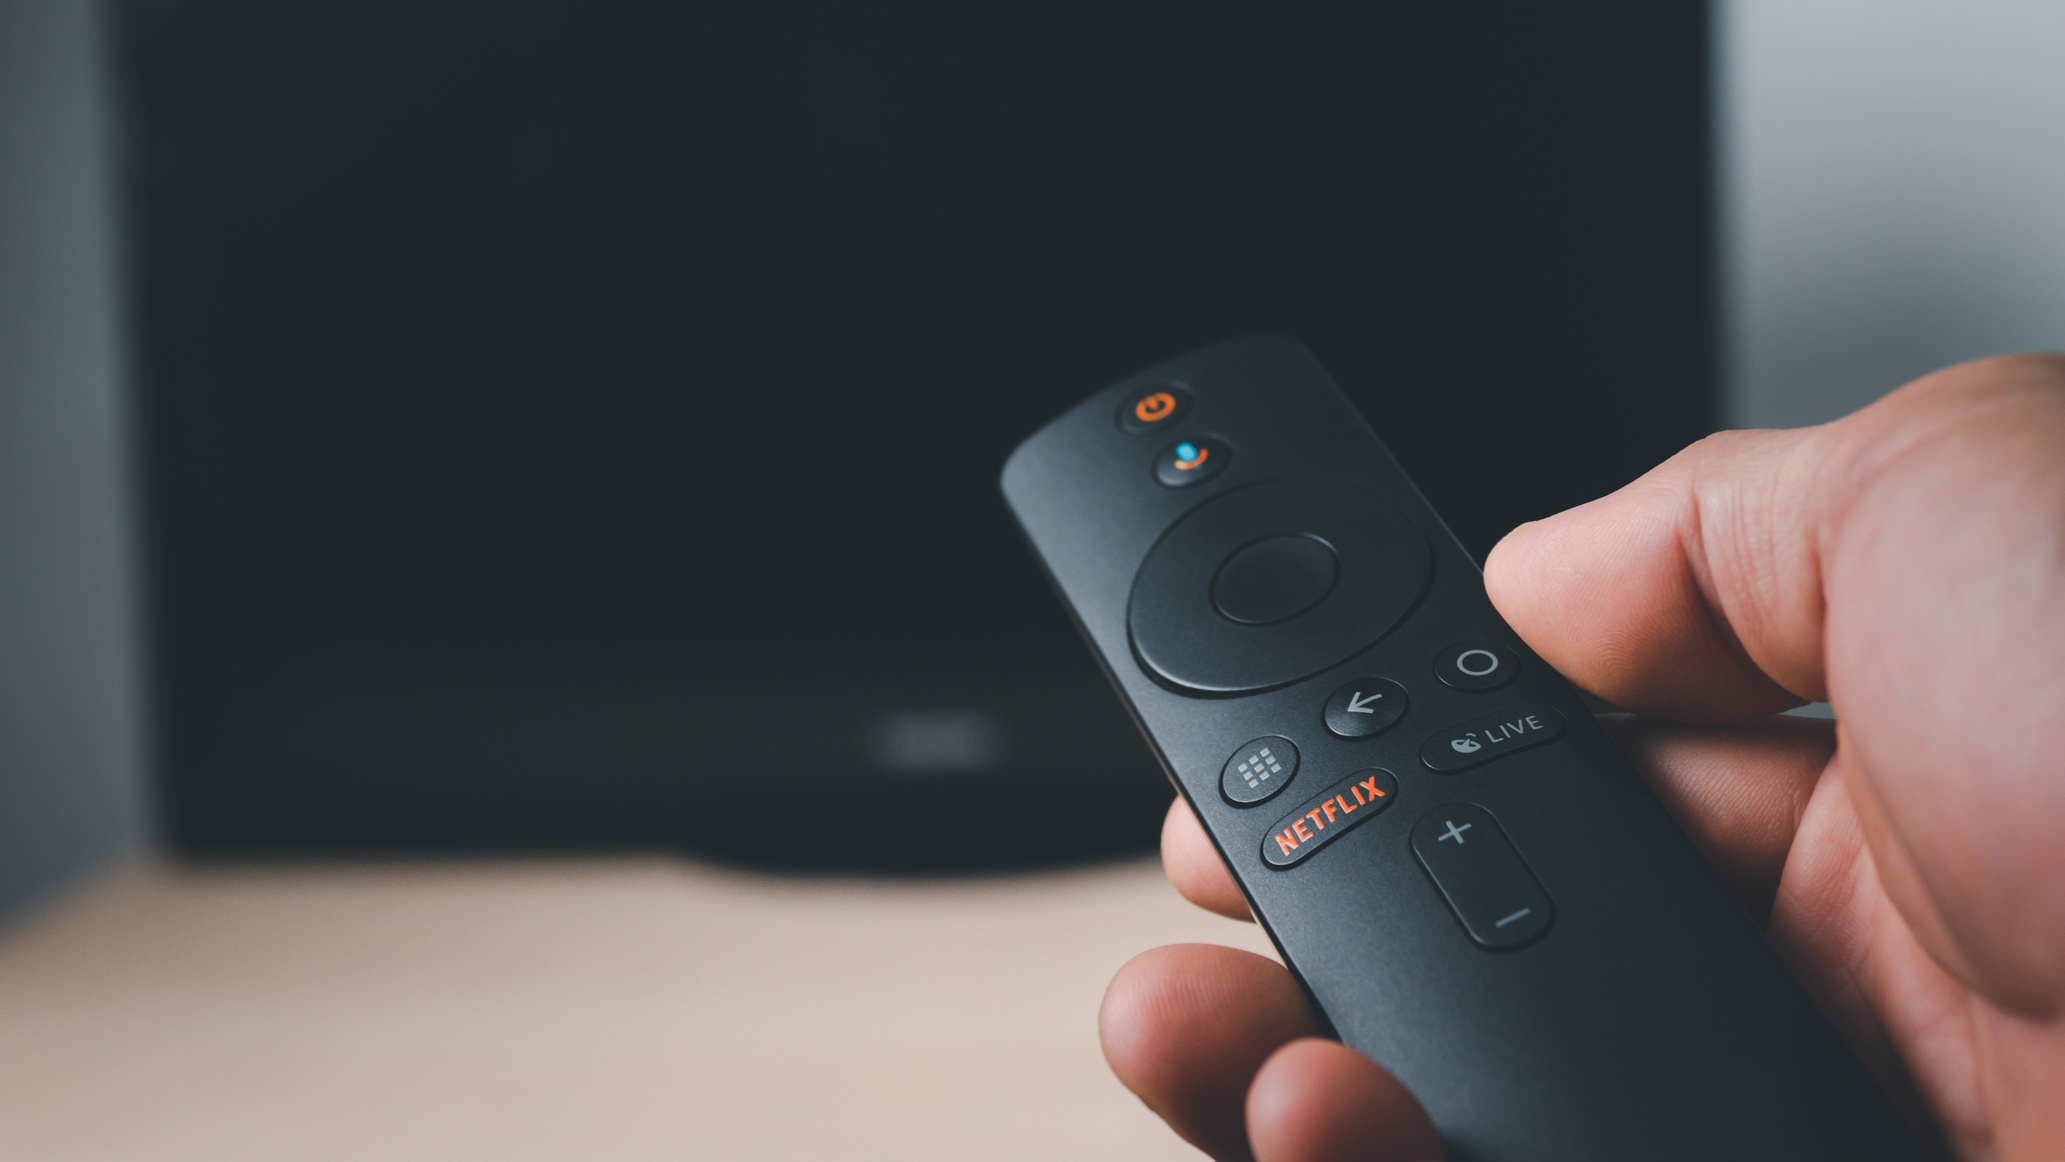 Remote Control with Netflix Button